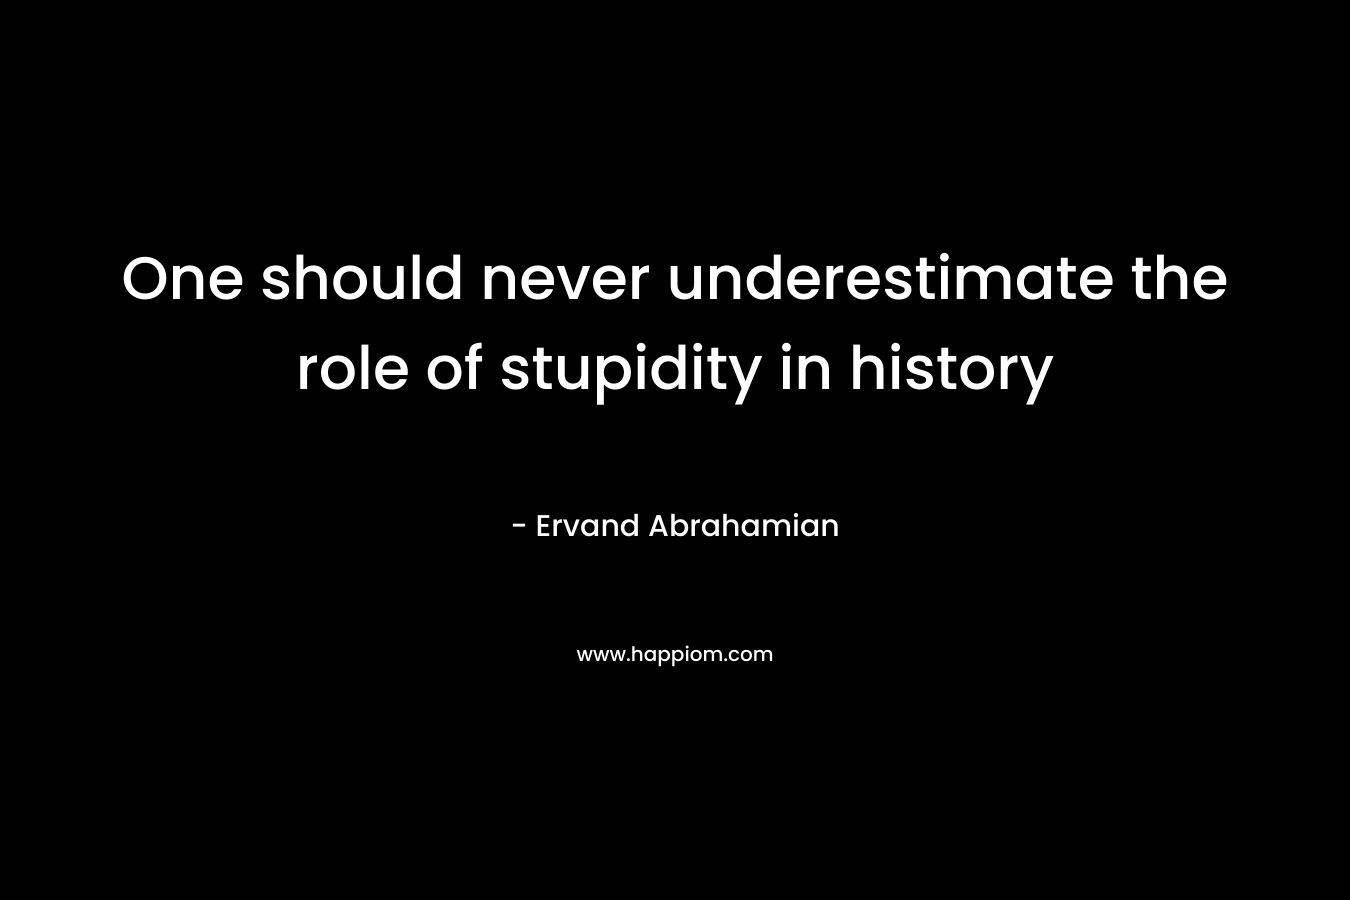 One should never underestimate the role of stupidity in history